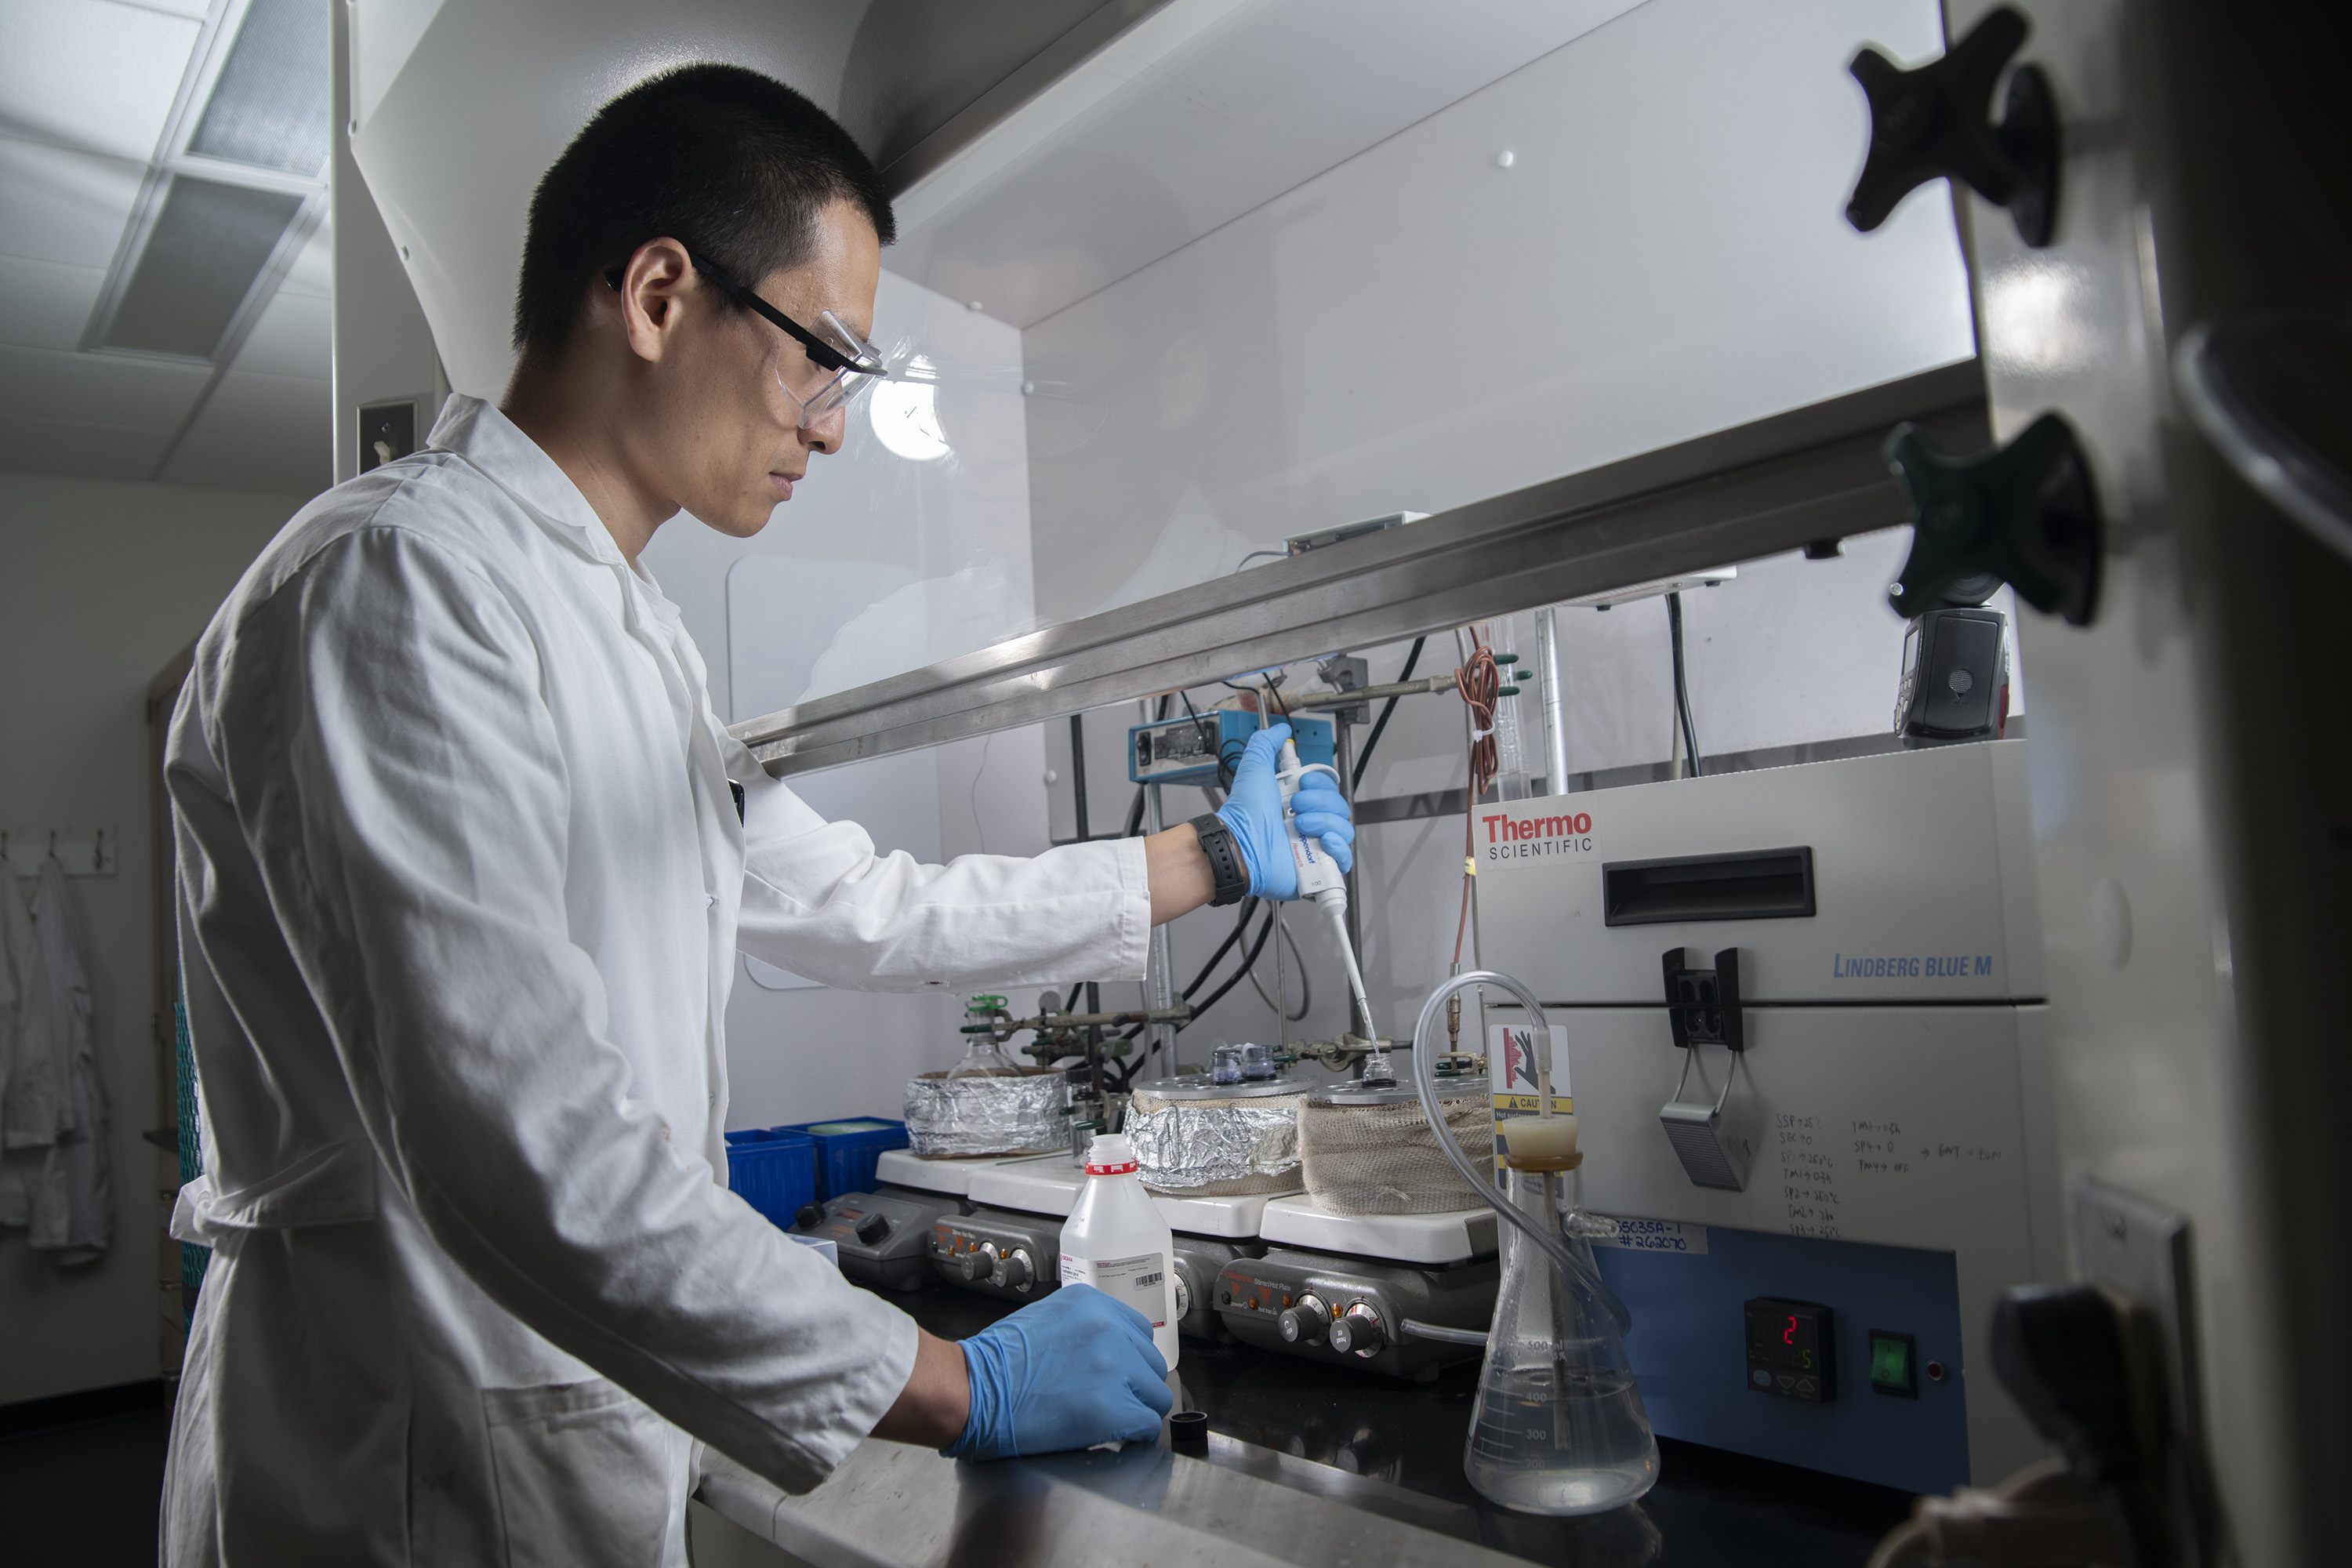 Zhengming Cao, a visiting graduate student at Georgia Tech, is working on improving durability for platinum-based fuel cell catalysts. (Credit: Christopher Moore)